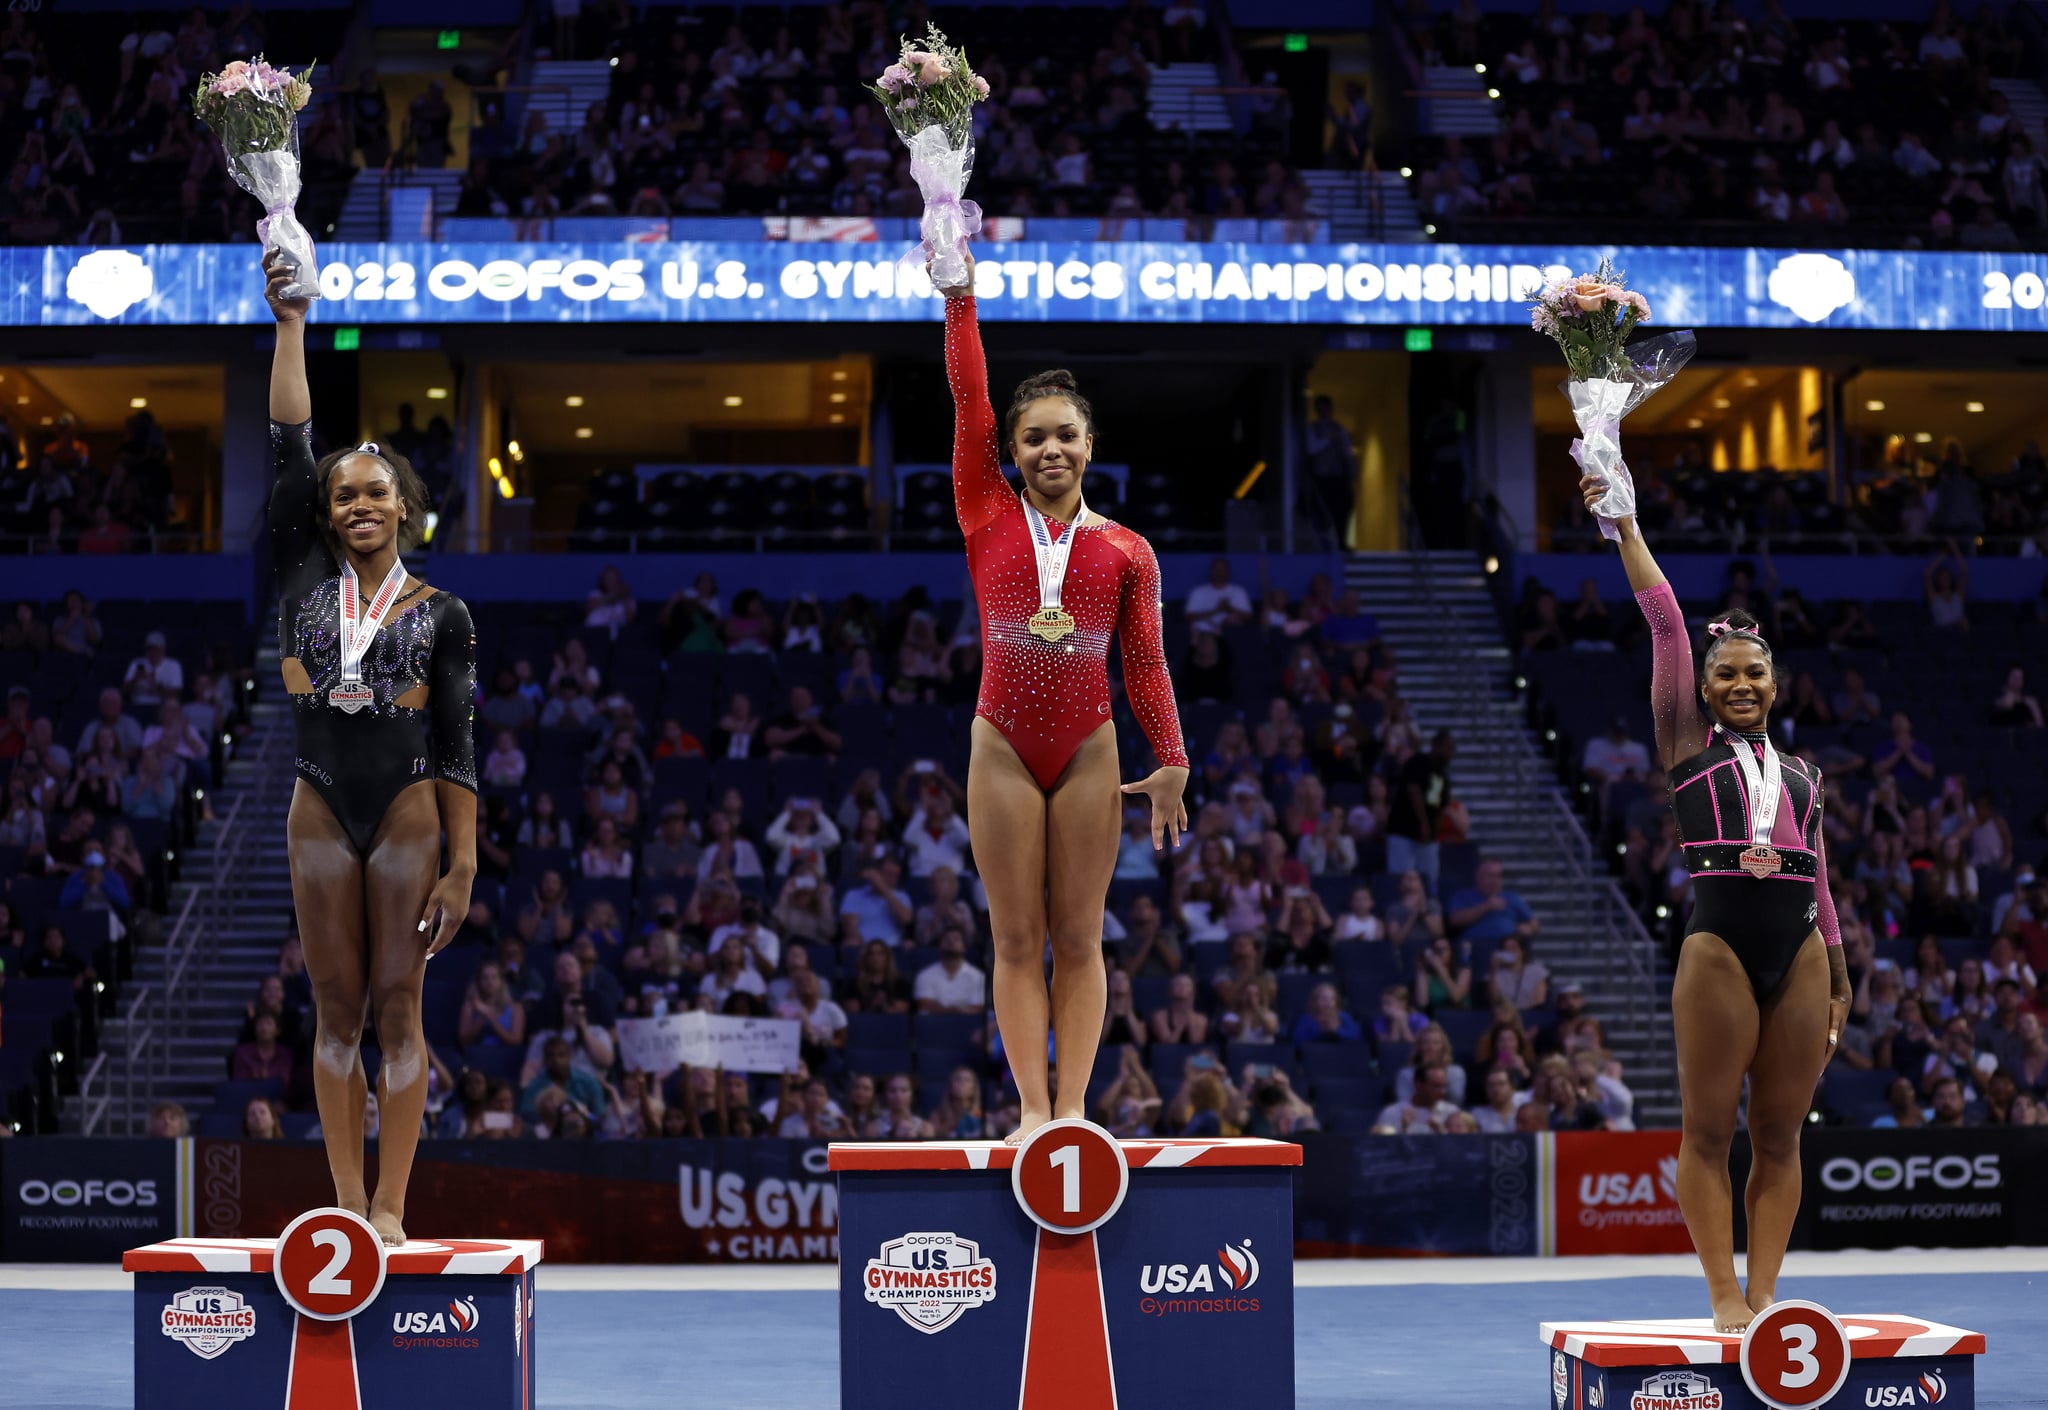 TAMPA, FLORIDA - AUGUST 21: Shilese Jones, Konnor McClain, and Jordan Chiles celebrate winning the all around competition during the 2022 US Gymnastics Championships at Amalie Arena on August 21, 2022 in Tampa, Florida. (Photo by Mike Ehrmann/Getty Images)